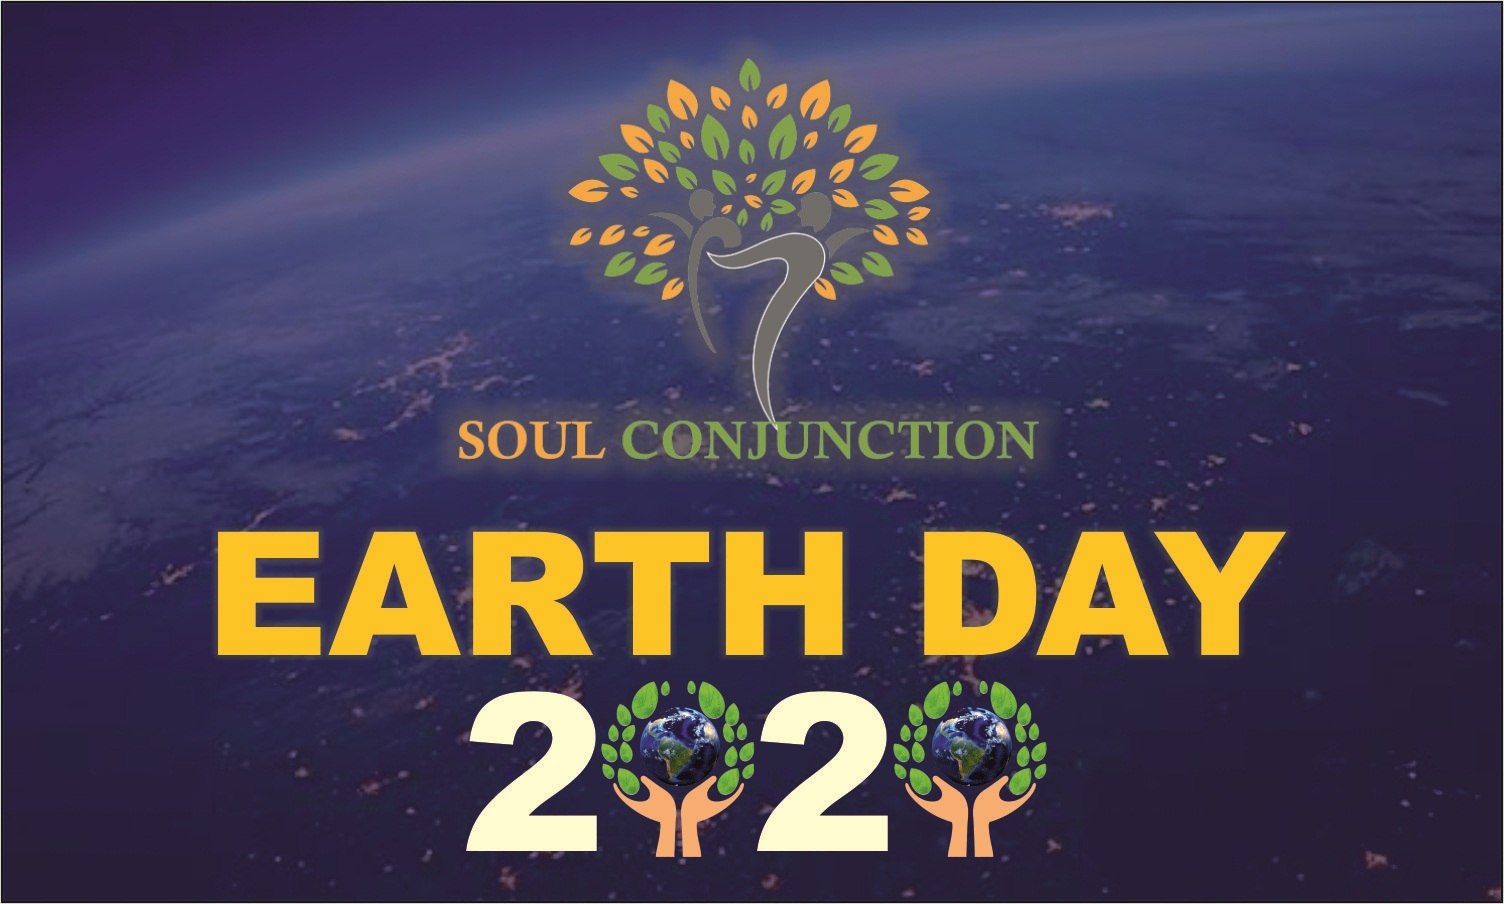 What Is Your Return Gift For Mother Earth, On This Earth Day-2020?_soulconjuction.com